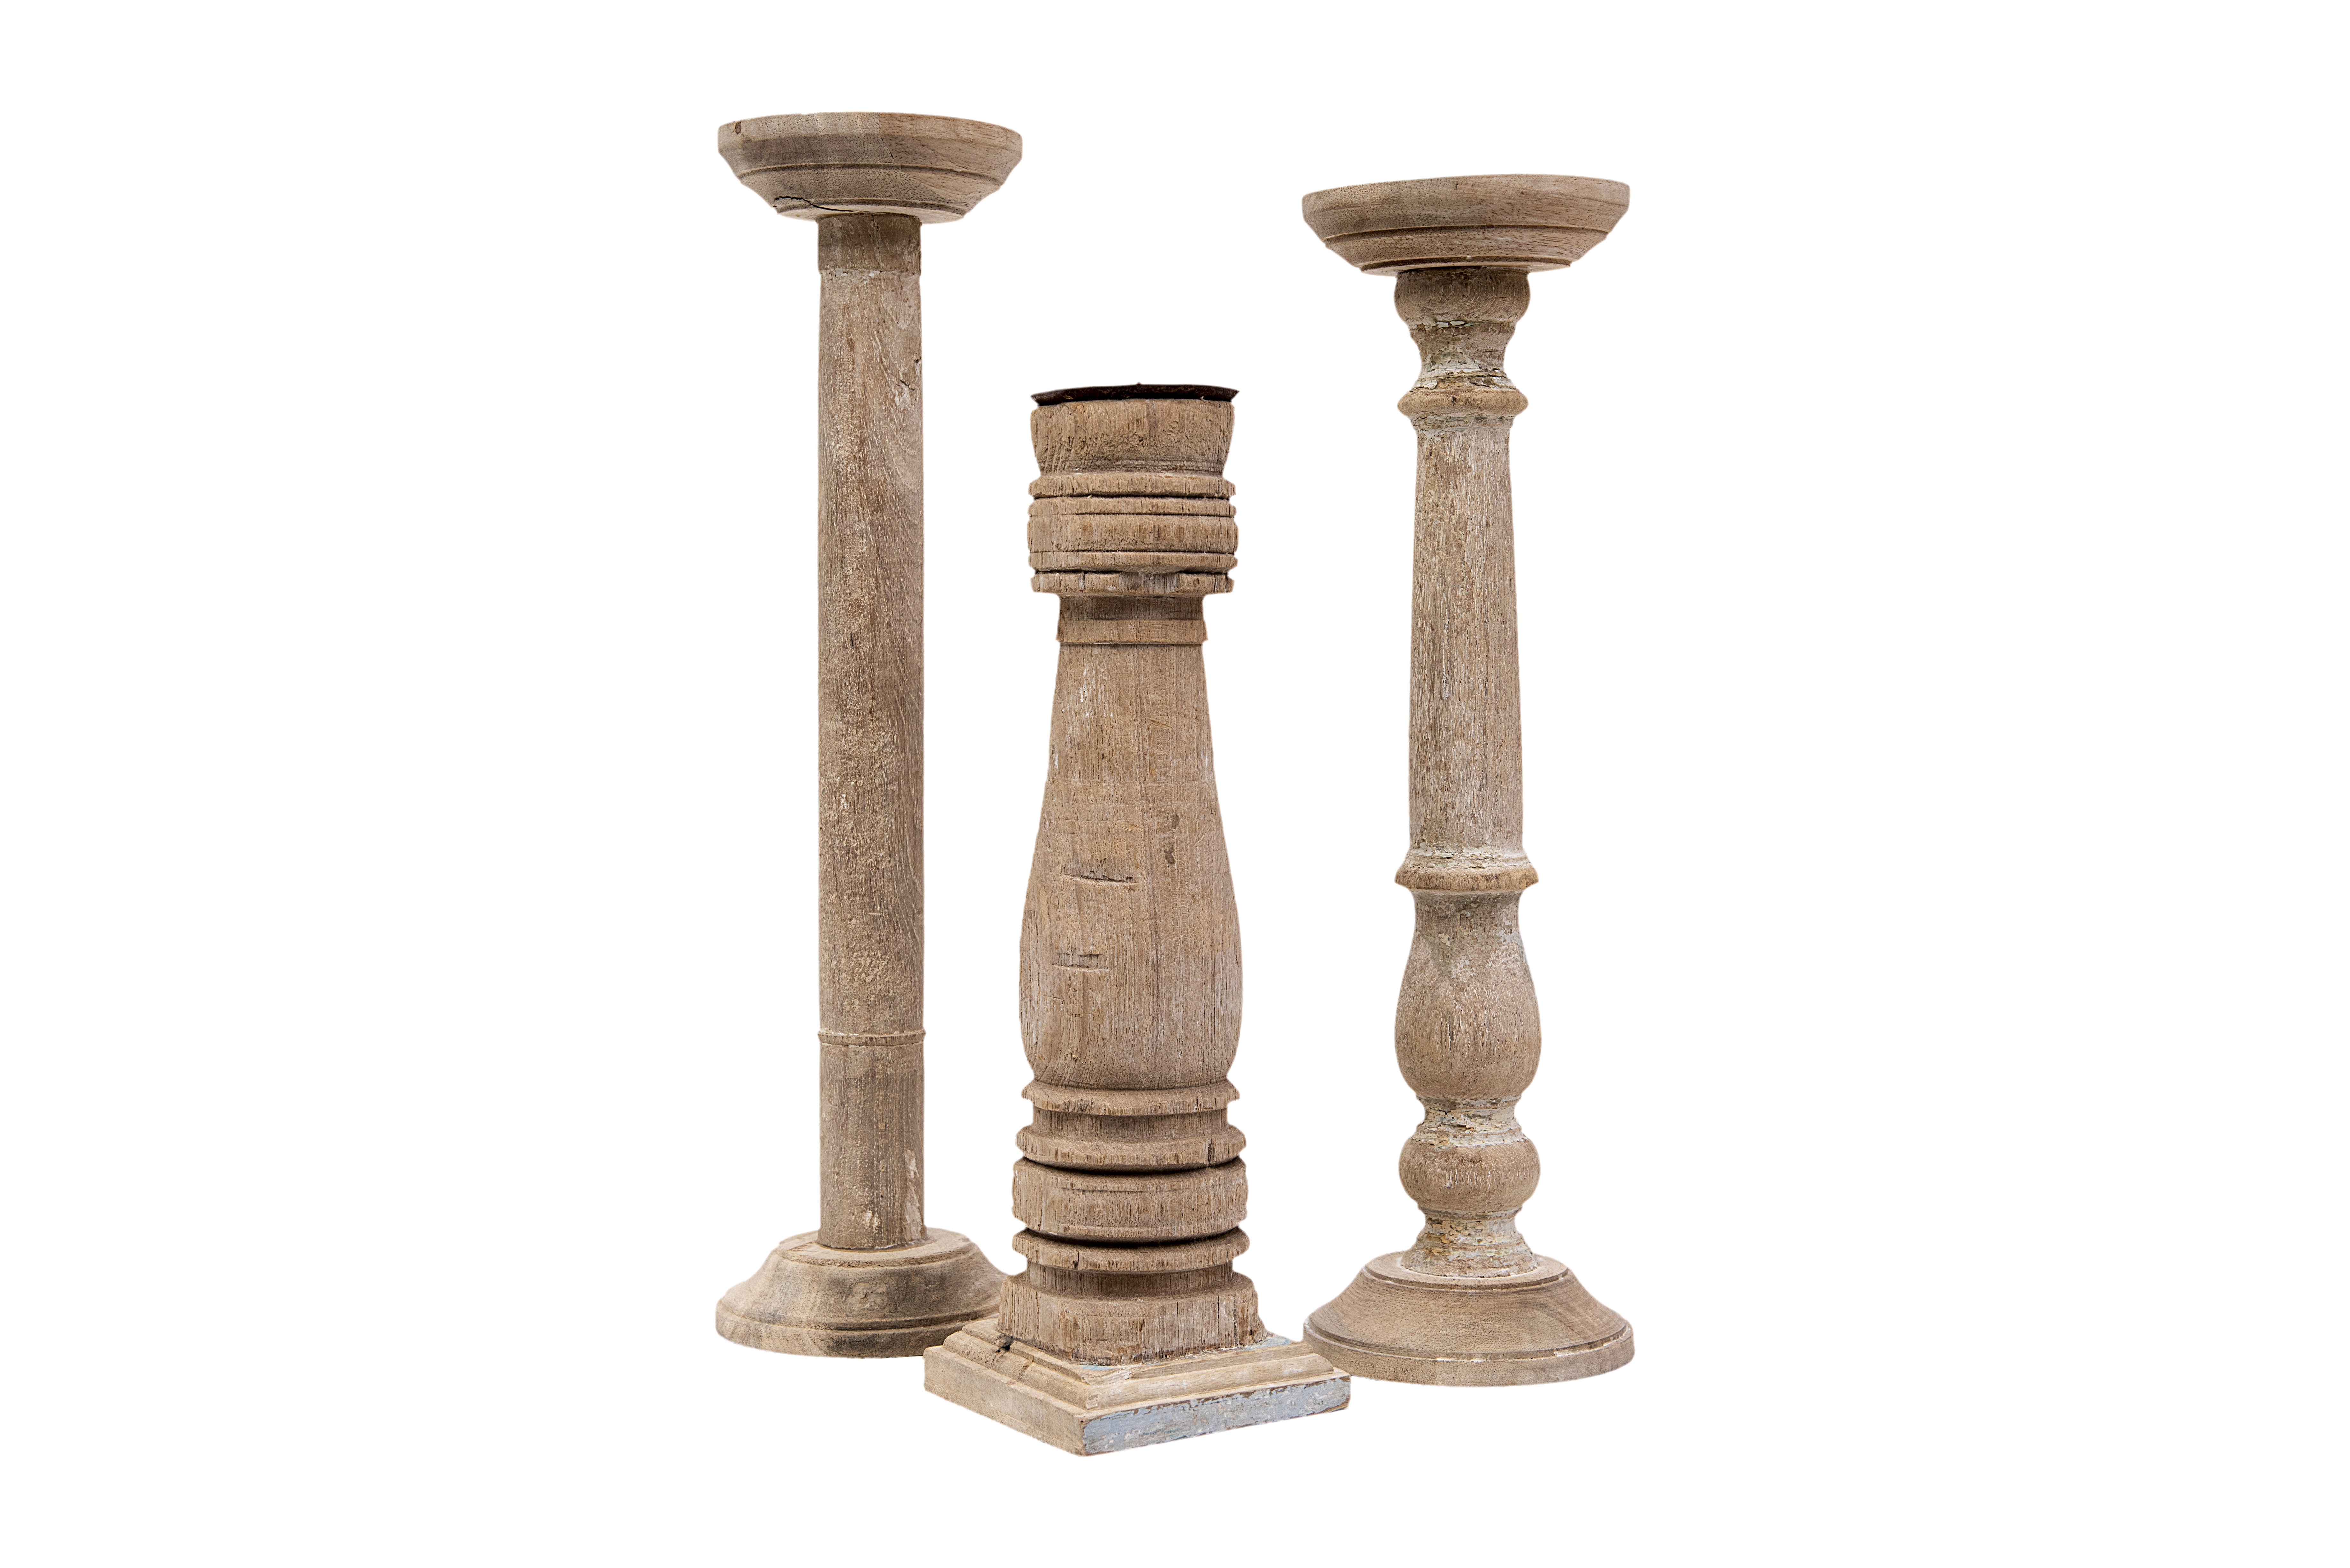 Set of 6 Different Found Wood & Metal Candleholders - Image 1